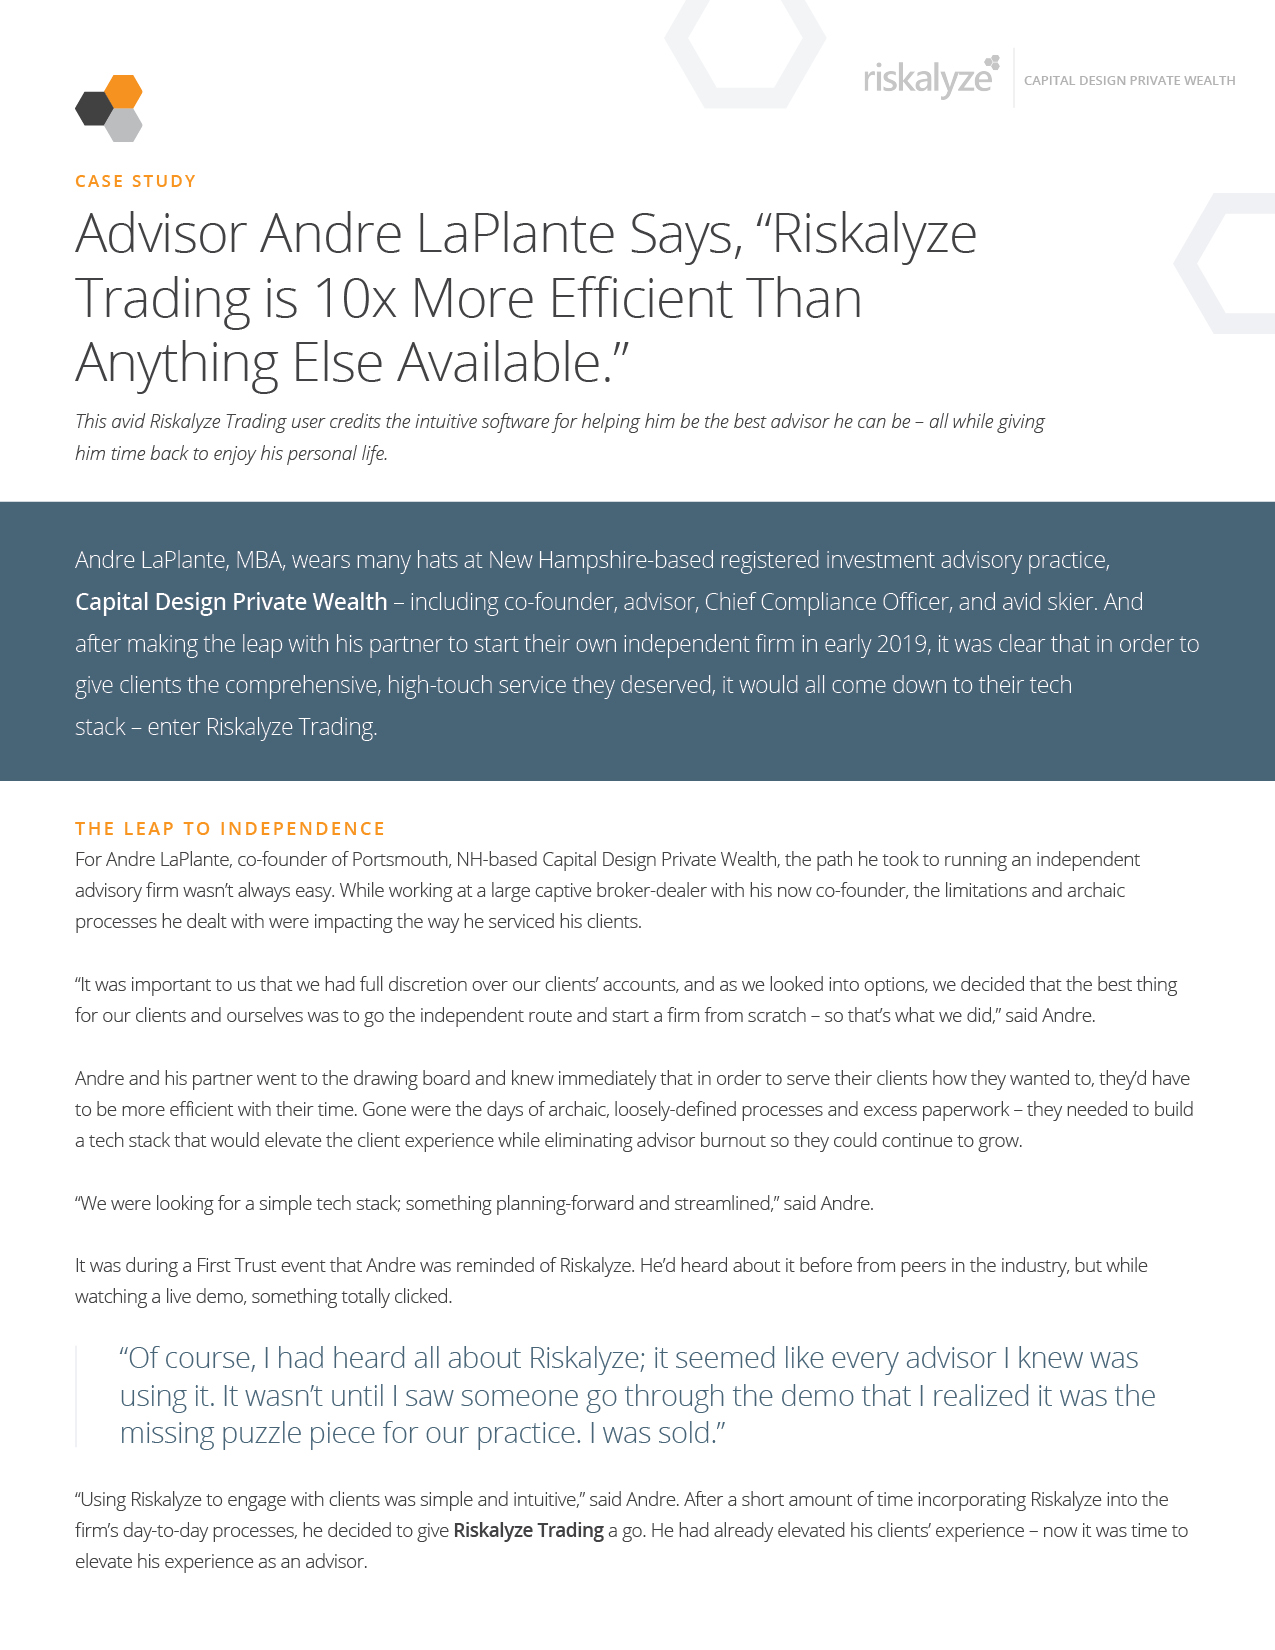 Andre_CaseStudy_Page_1